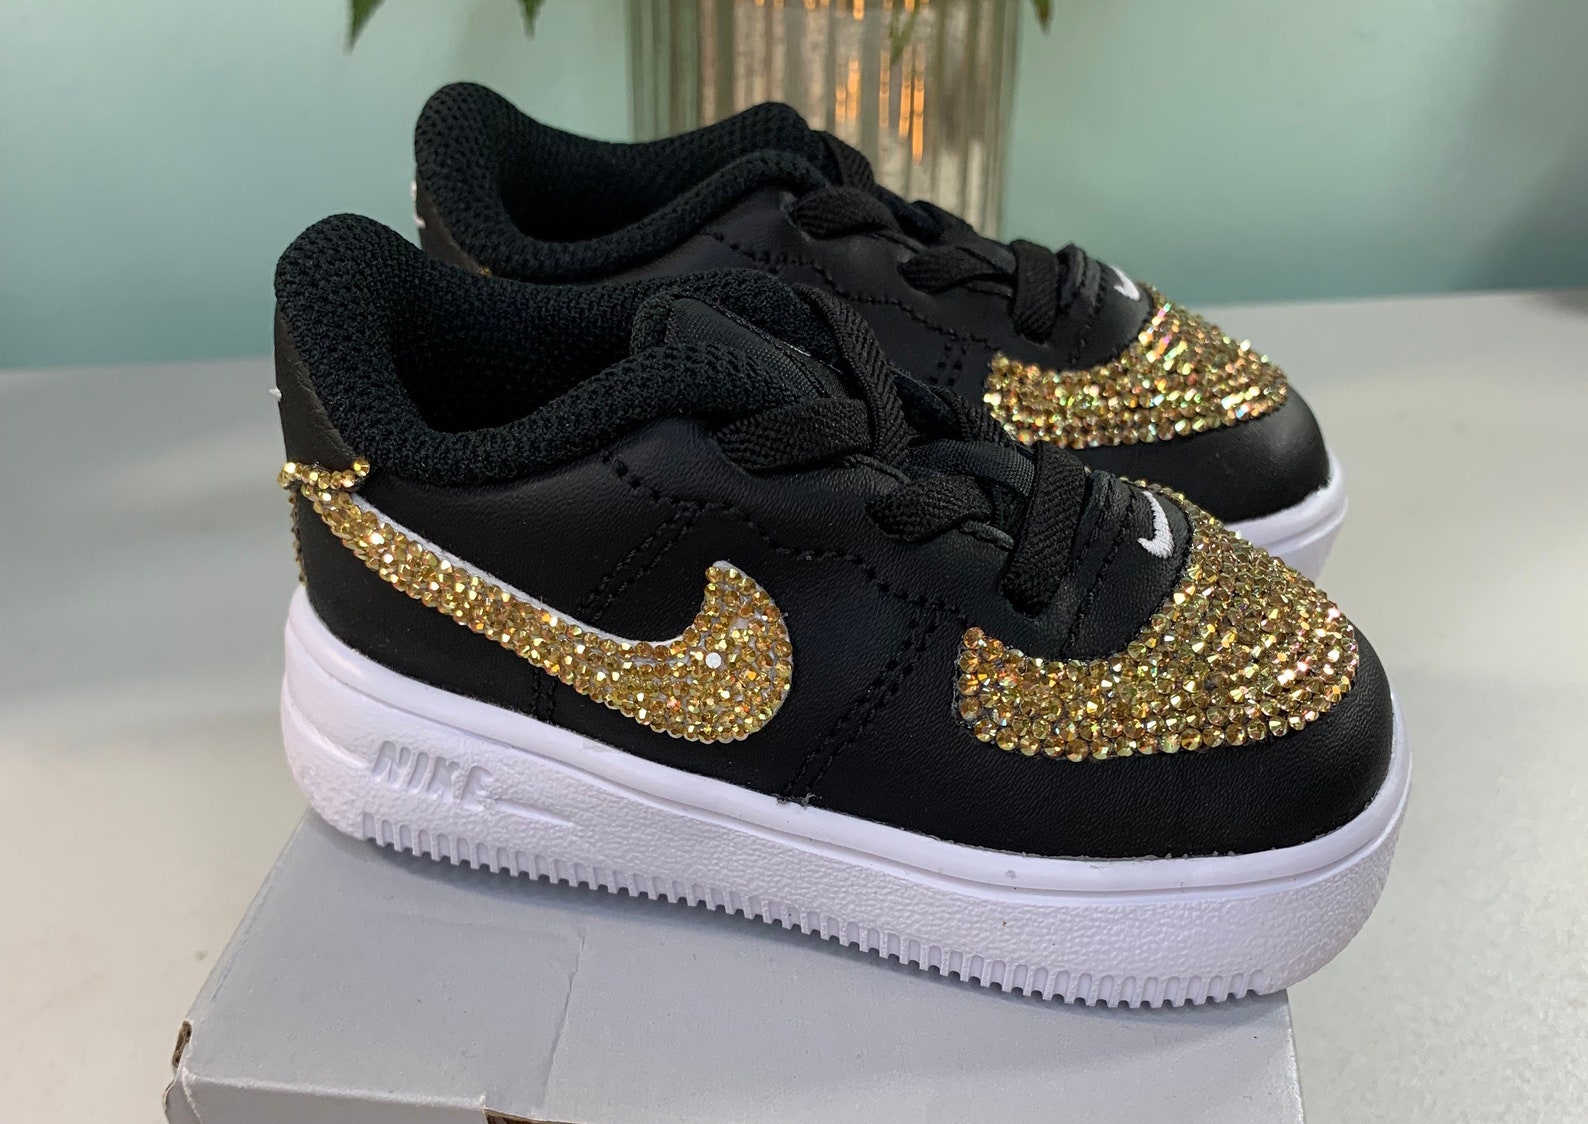 GORGEOUS Toddler Kids Nike Air Force 1 2018 Edition Bedazzled | Etsy